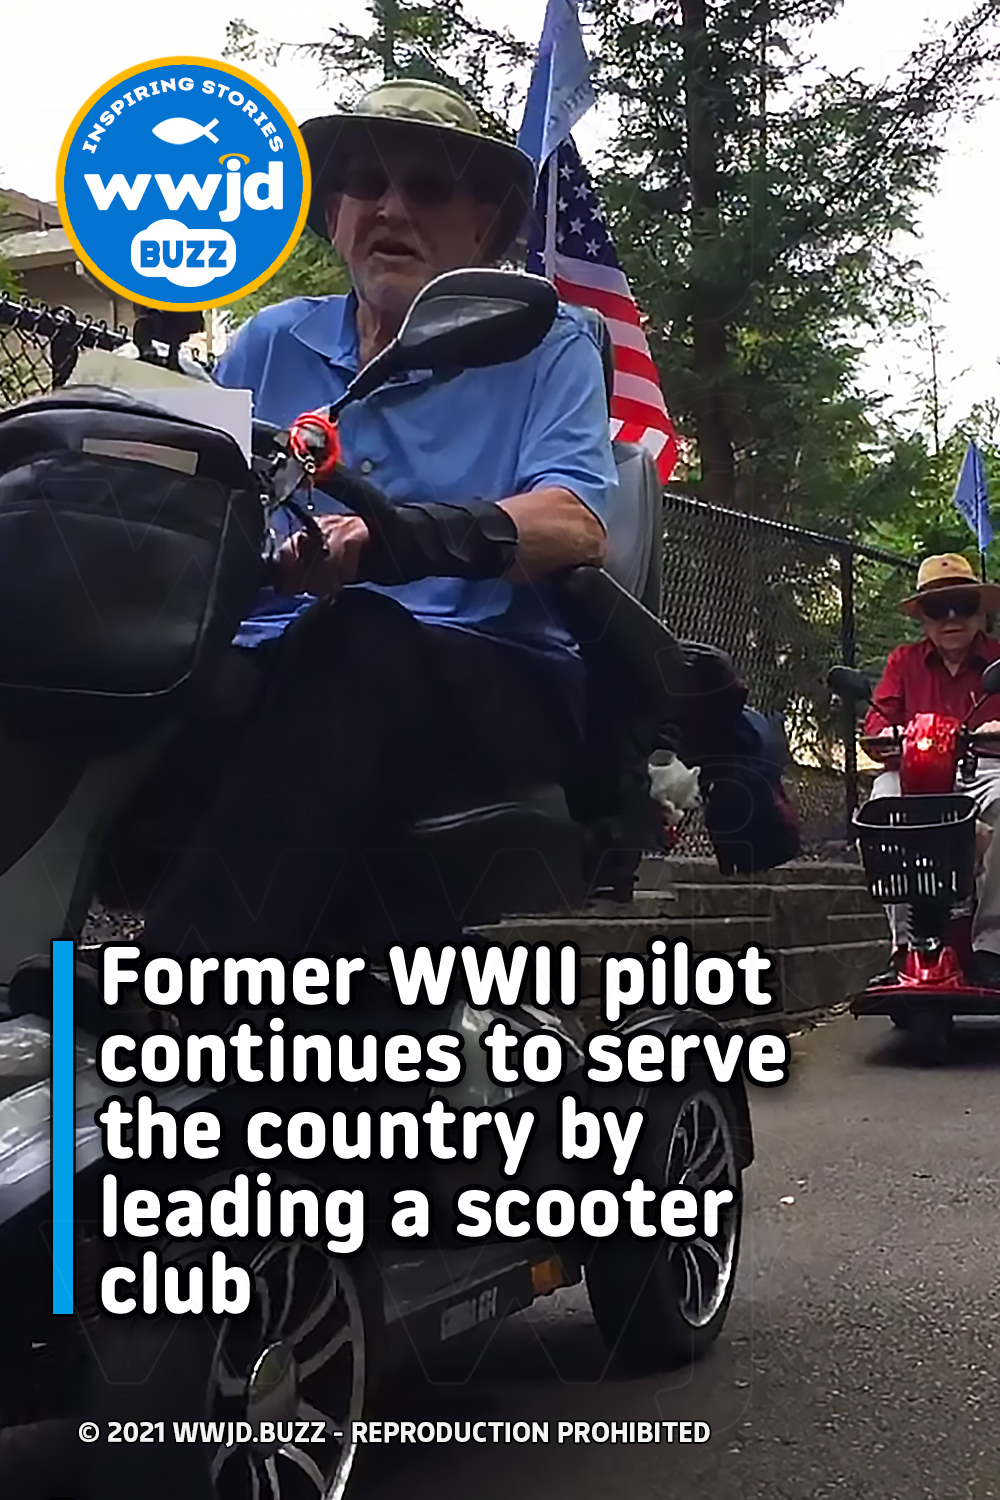 Former WWII pilot continues to serve the country by leading a scooter club